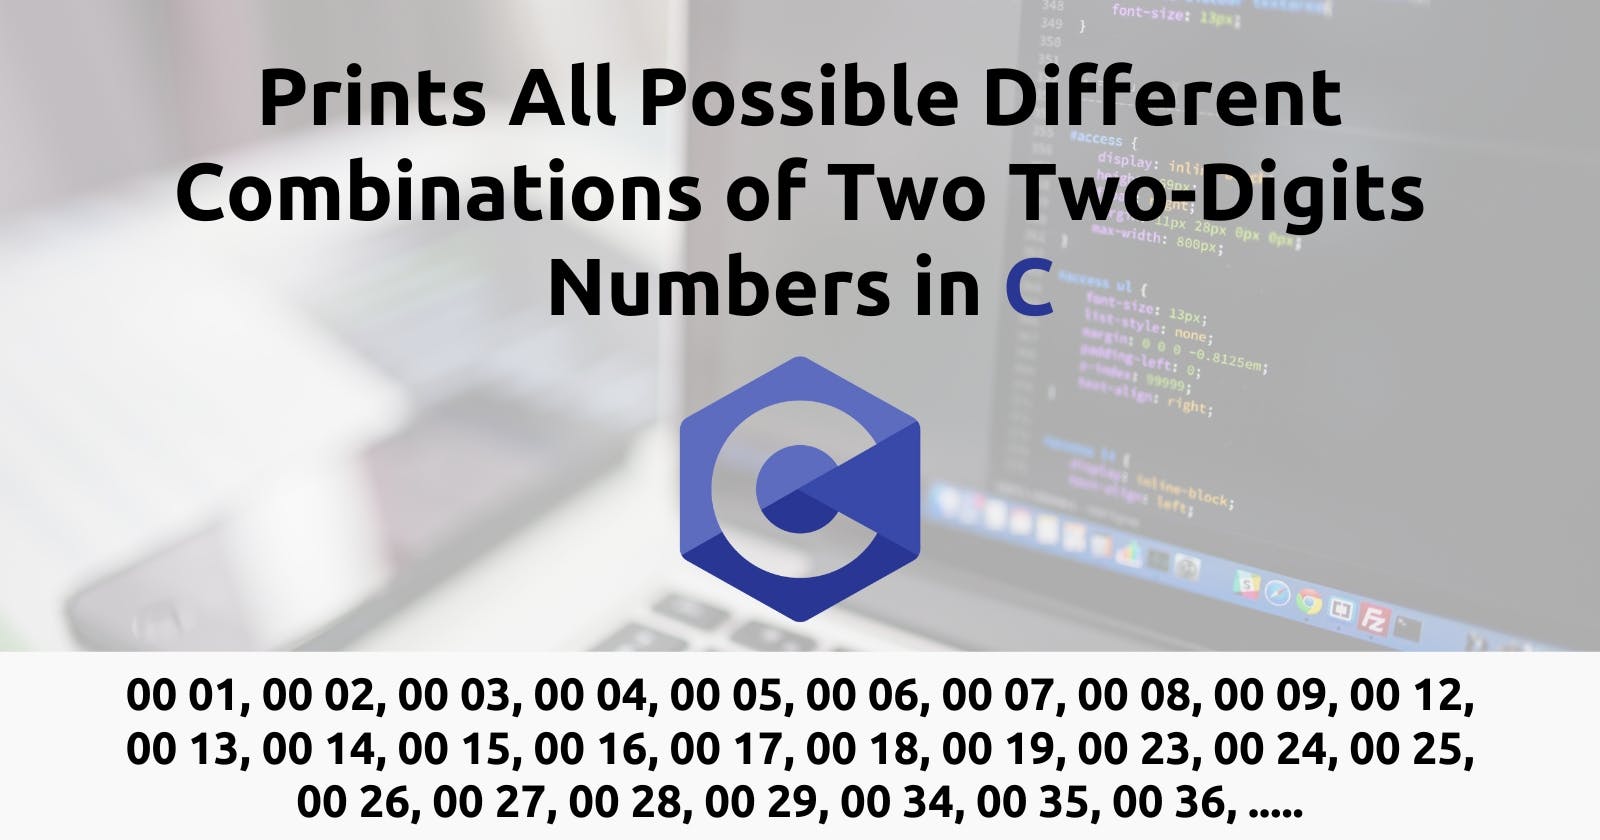 How to Write a Program That Prints All Possible Combinations of Two Two-Digit Numbers in C